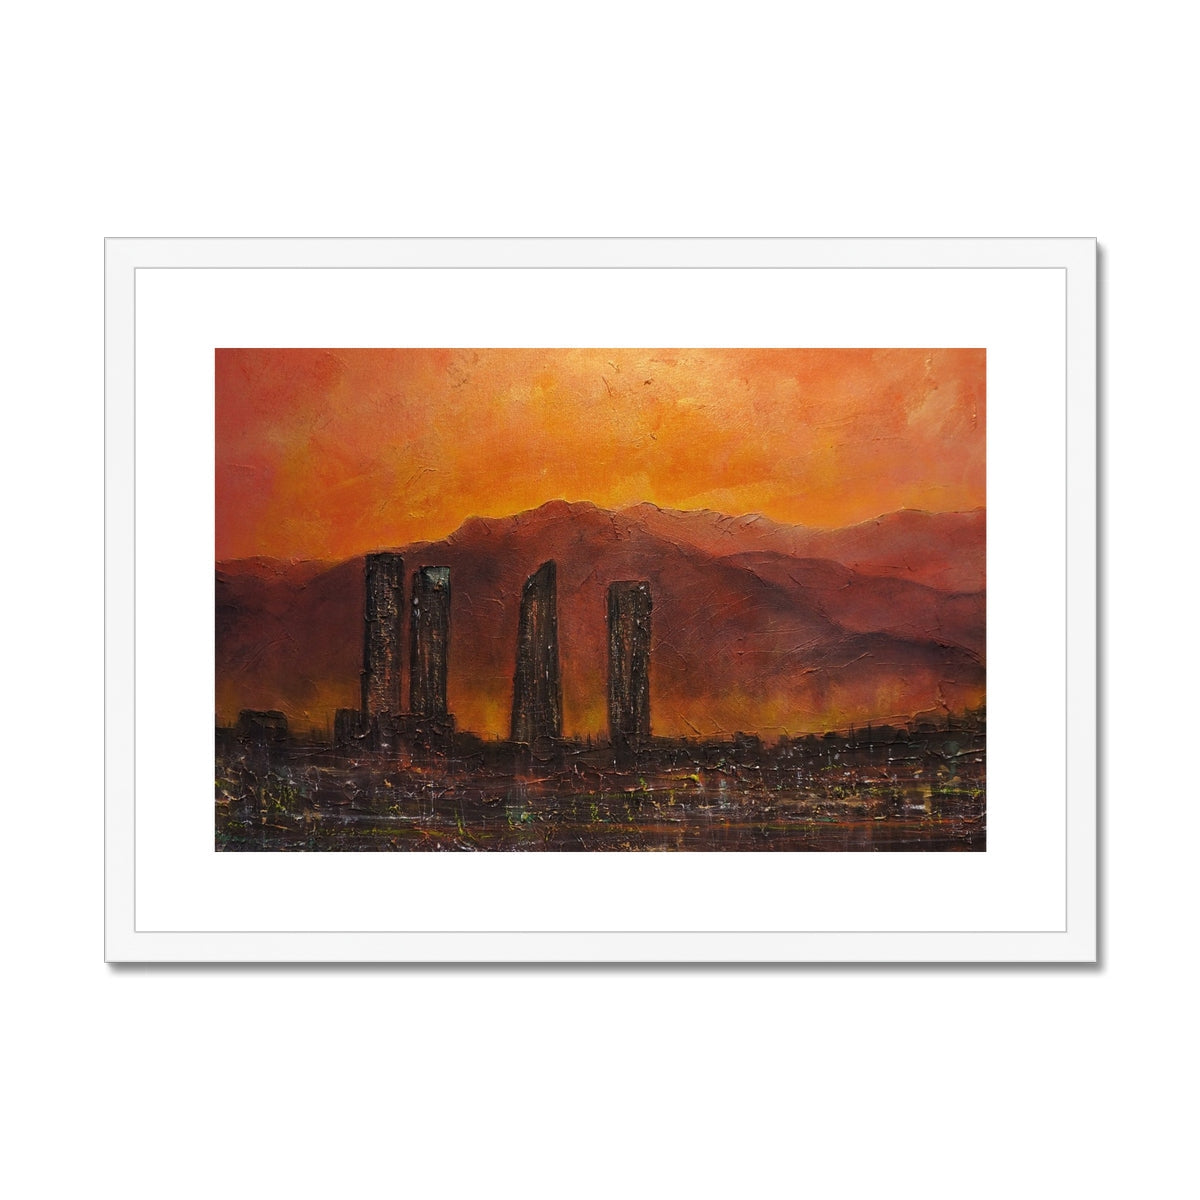 Madrid Dusk Painting | Framed & Mounted Prints From Scotland-Framed & Mounted Prints-World Art Gallery-A2 Landscape-White Frame-Paintings, Prints, Homeware, Art Gifts From Scotland By Scottish Artist Kevin Hunter